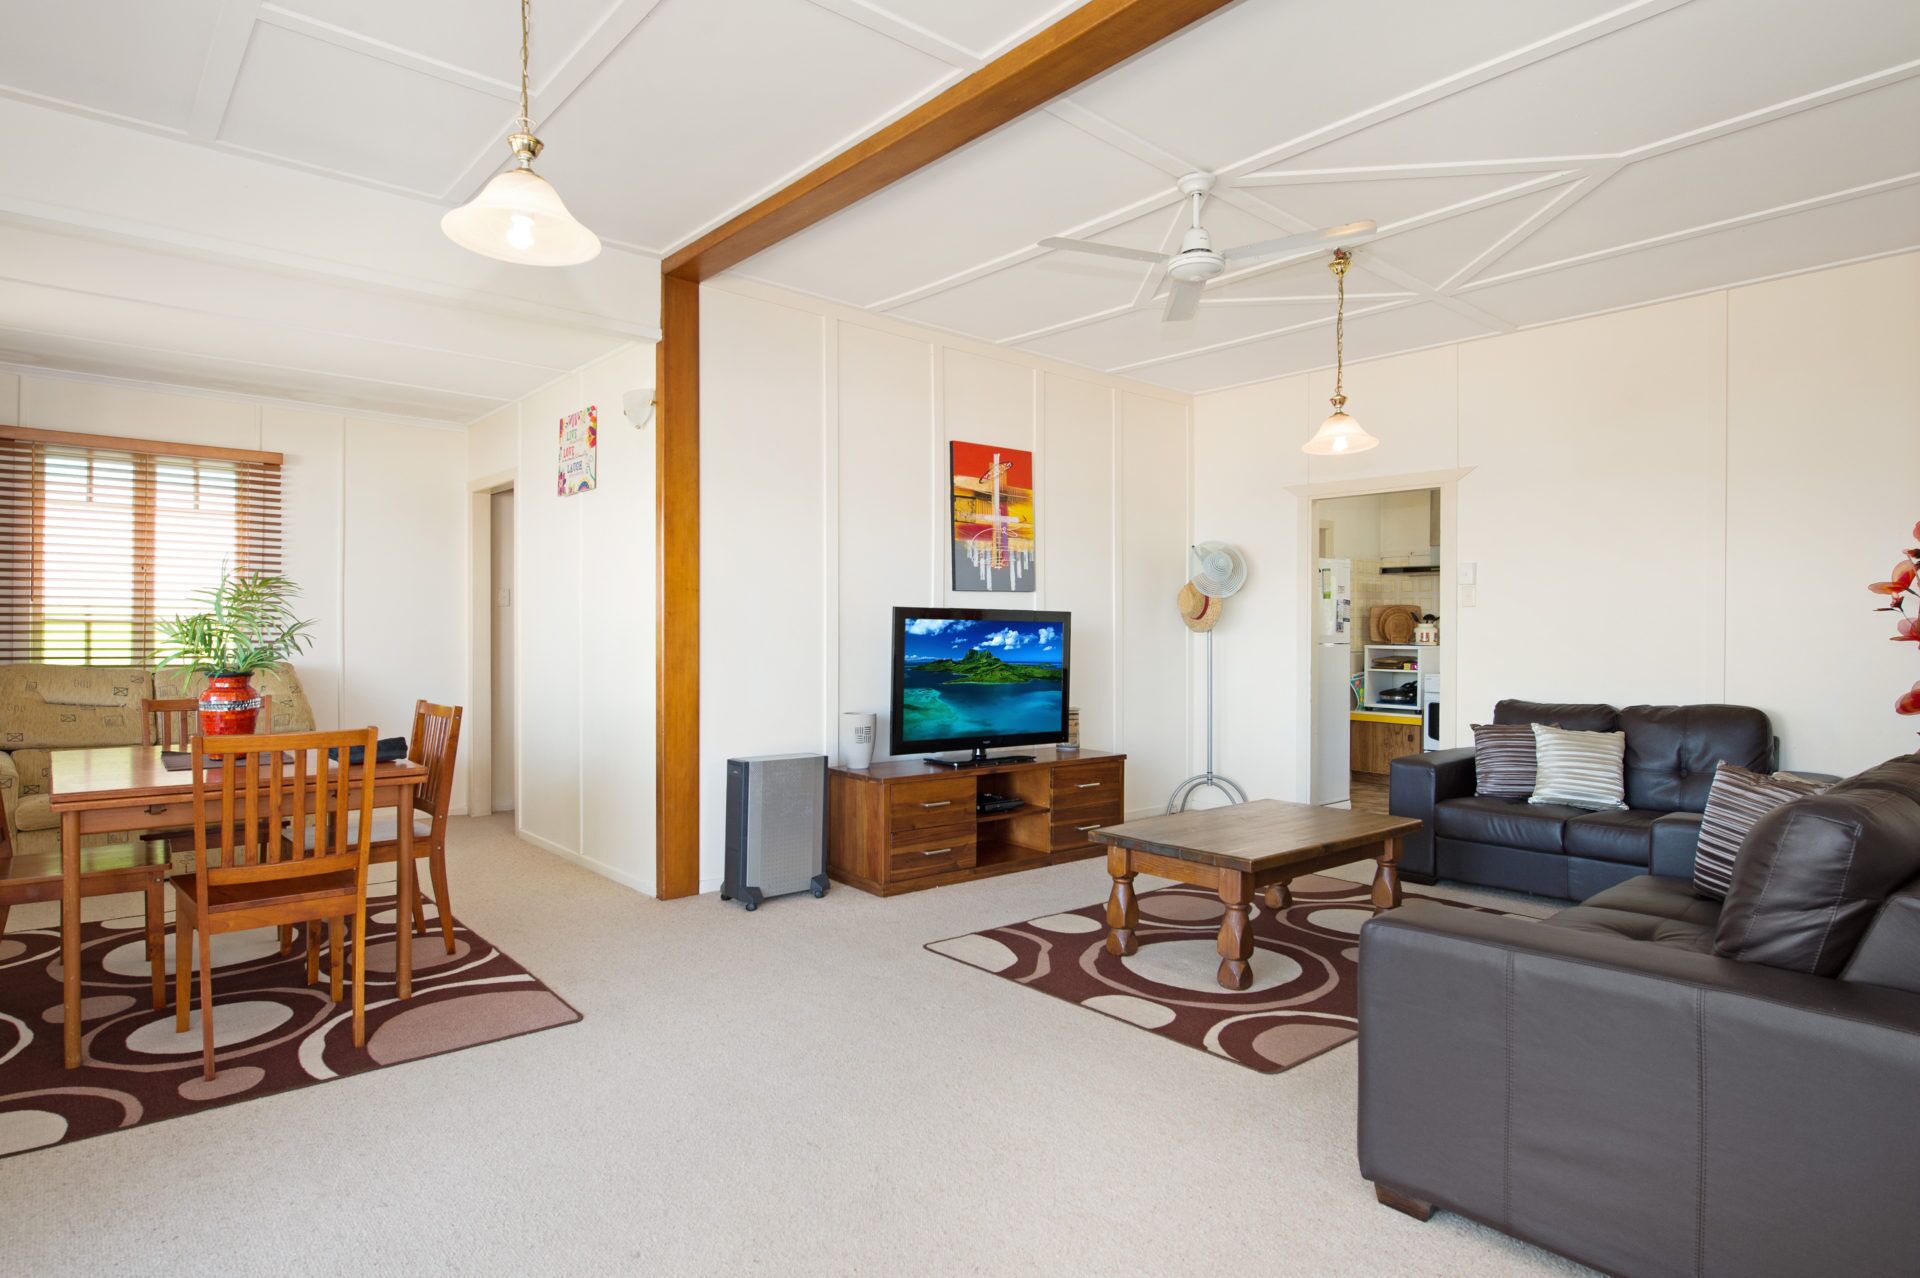 Wheelchair Friendly With Water Views - Welsby Pde, Bongaree